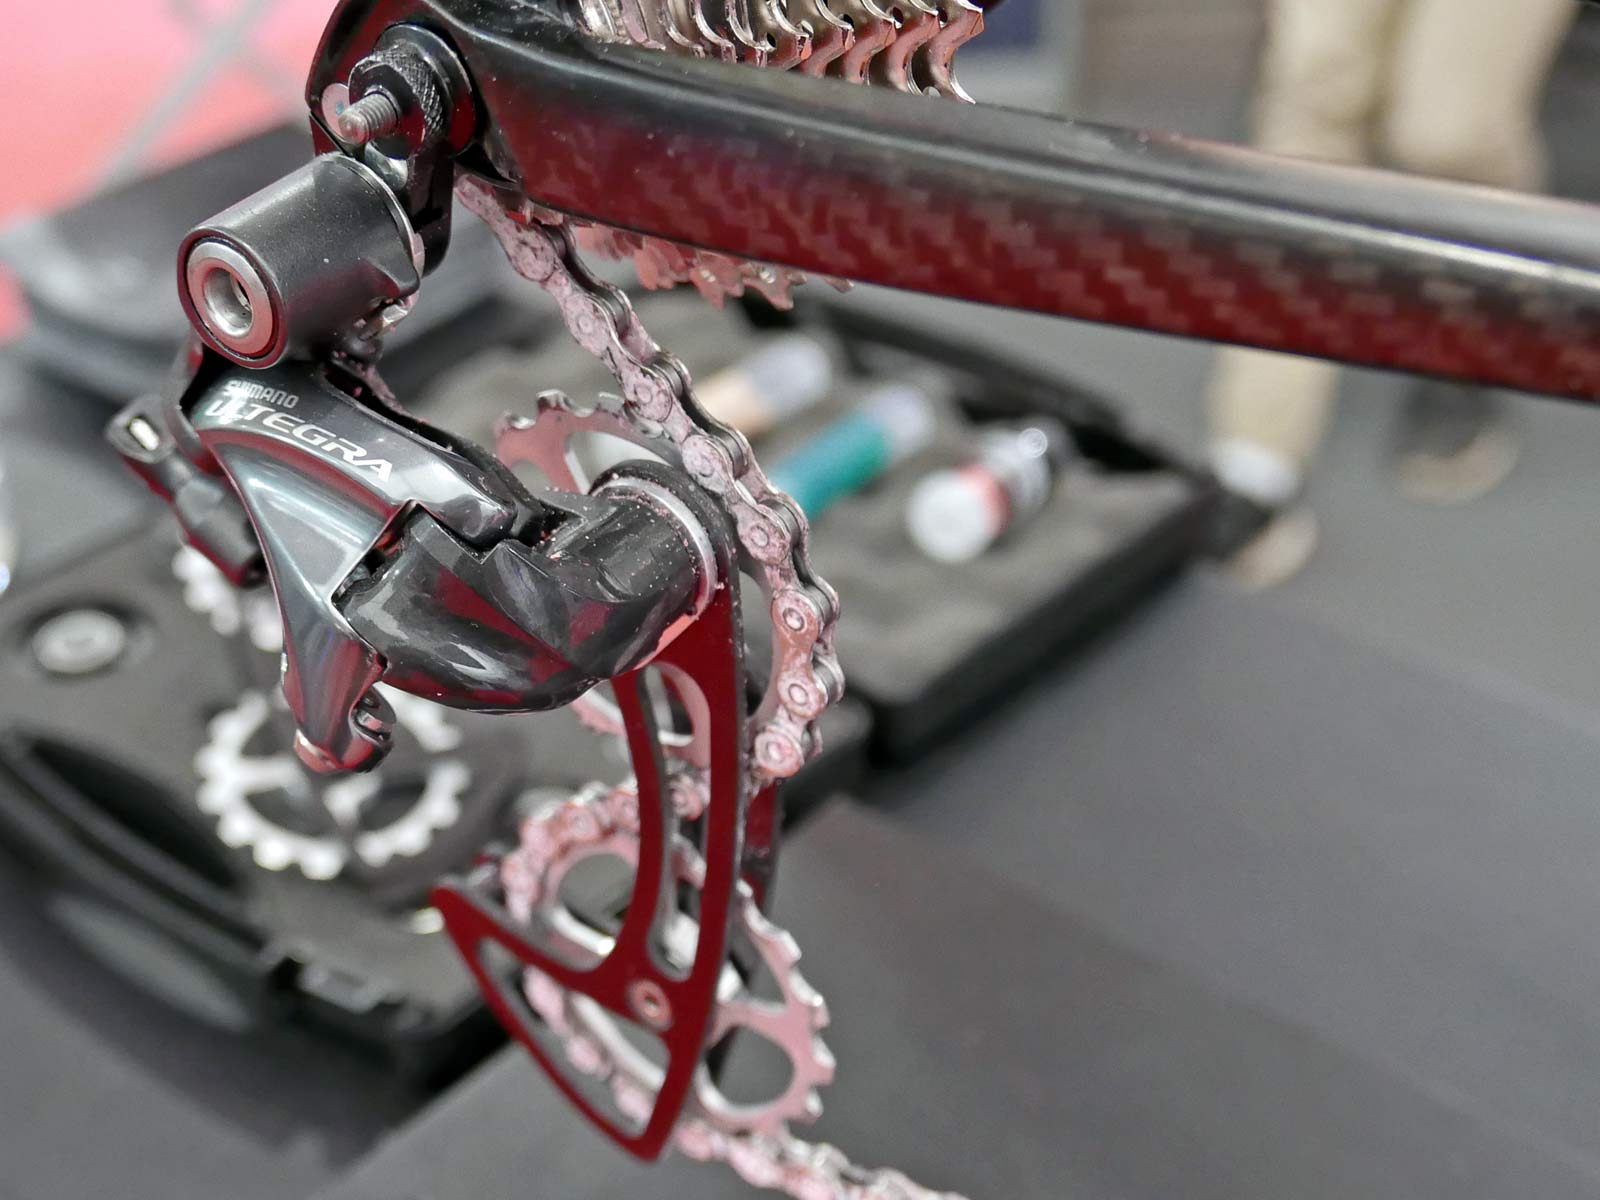 EB17: Cycling Ceramic’s fast spinning Oversized Derailleur Pulleys